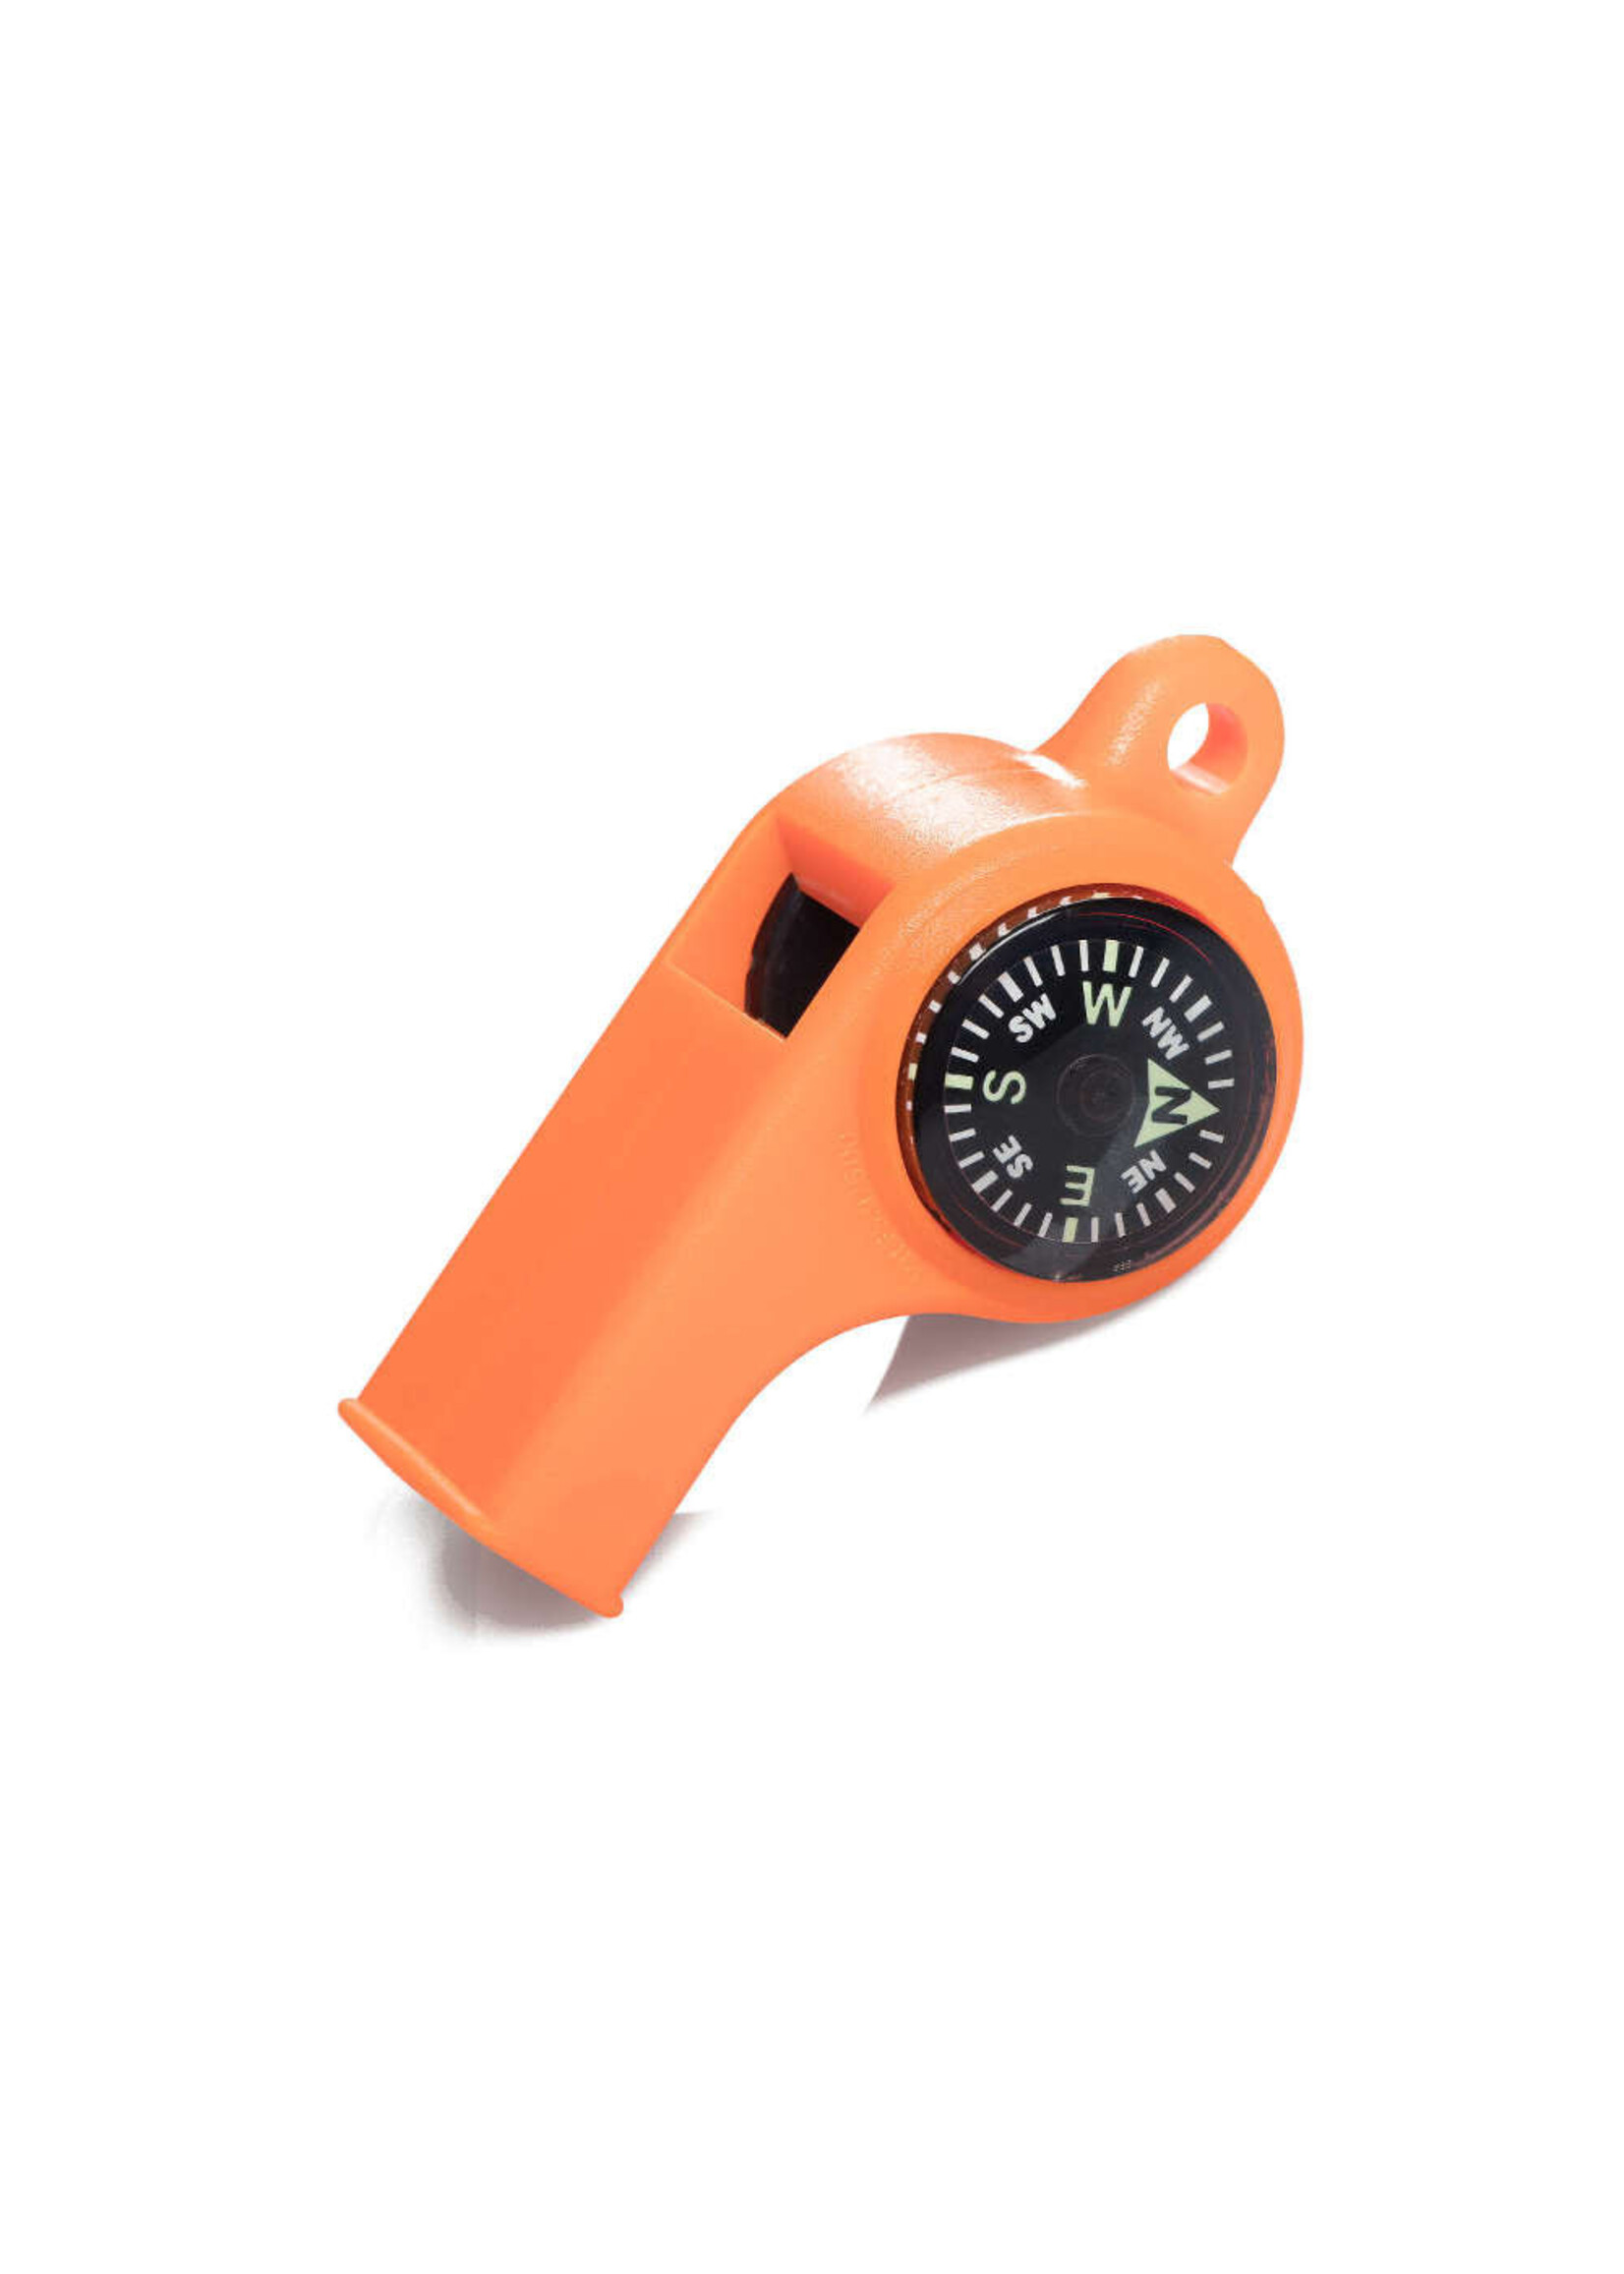 Mendota Products Sportsman's Whistle with Compass & Temperature Gauge Upland Orange